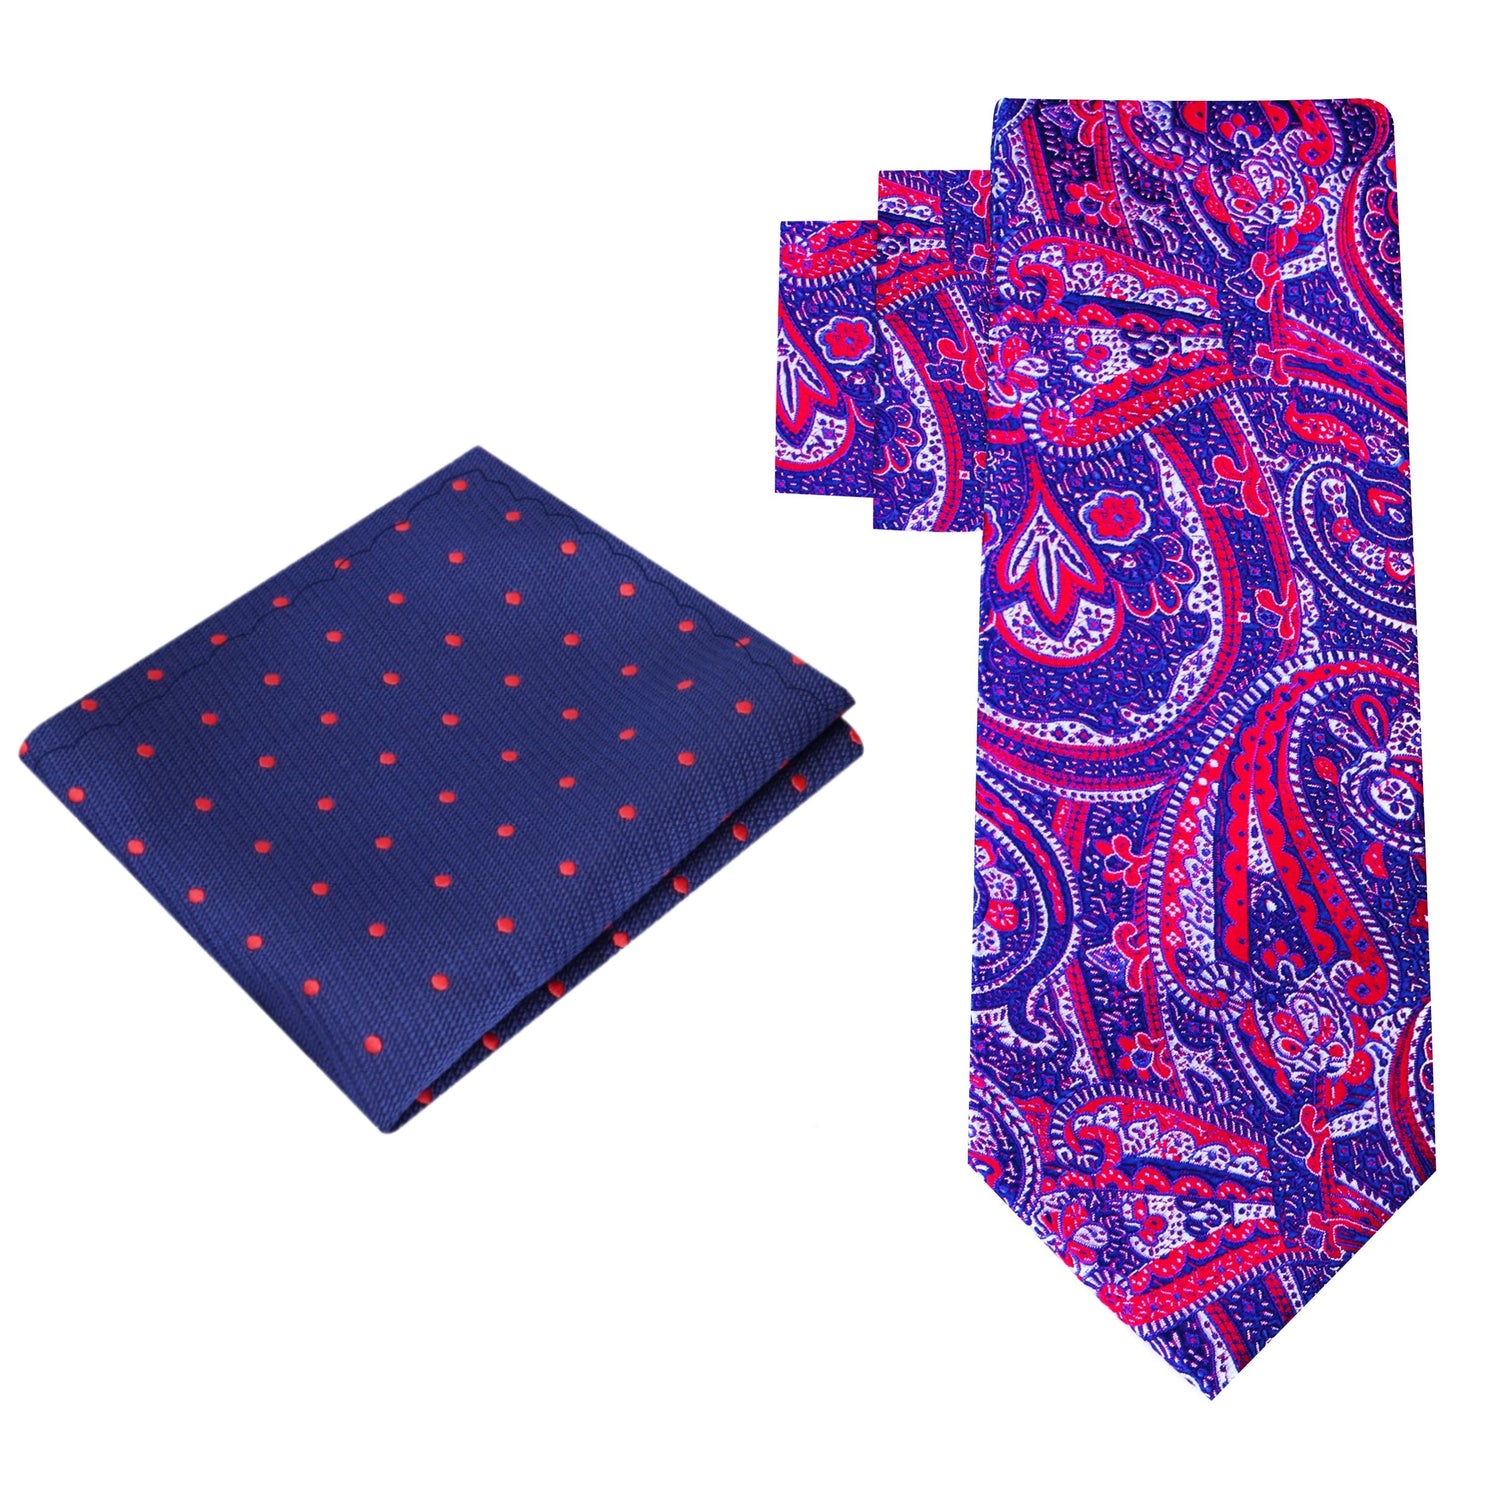 Alt View: A Red, White, Blue Intricate Design And Paisley Pattern Silk Necktie, Blue, Red Dot Pocket Square